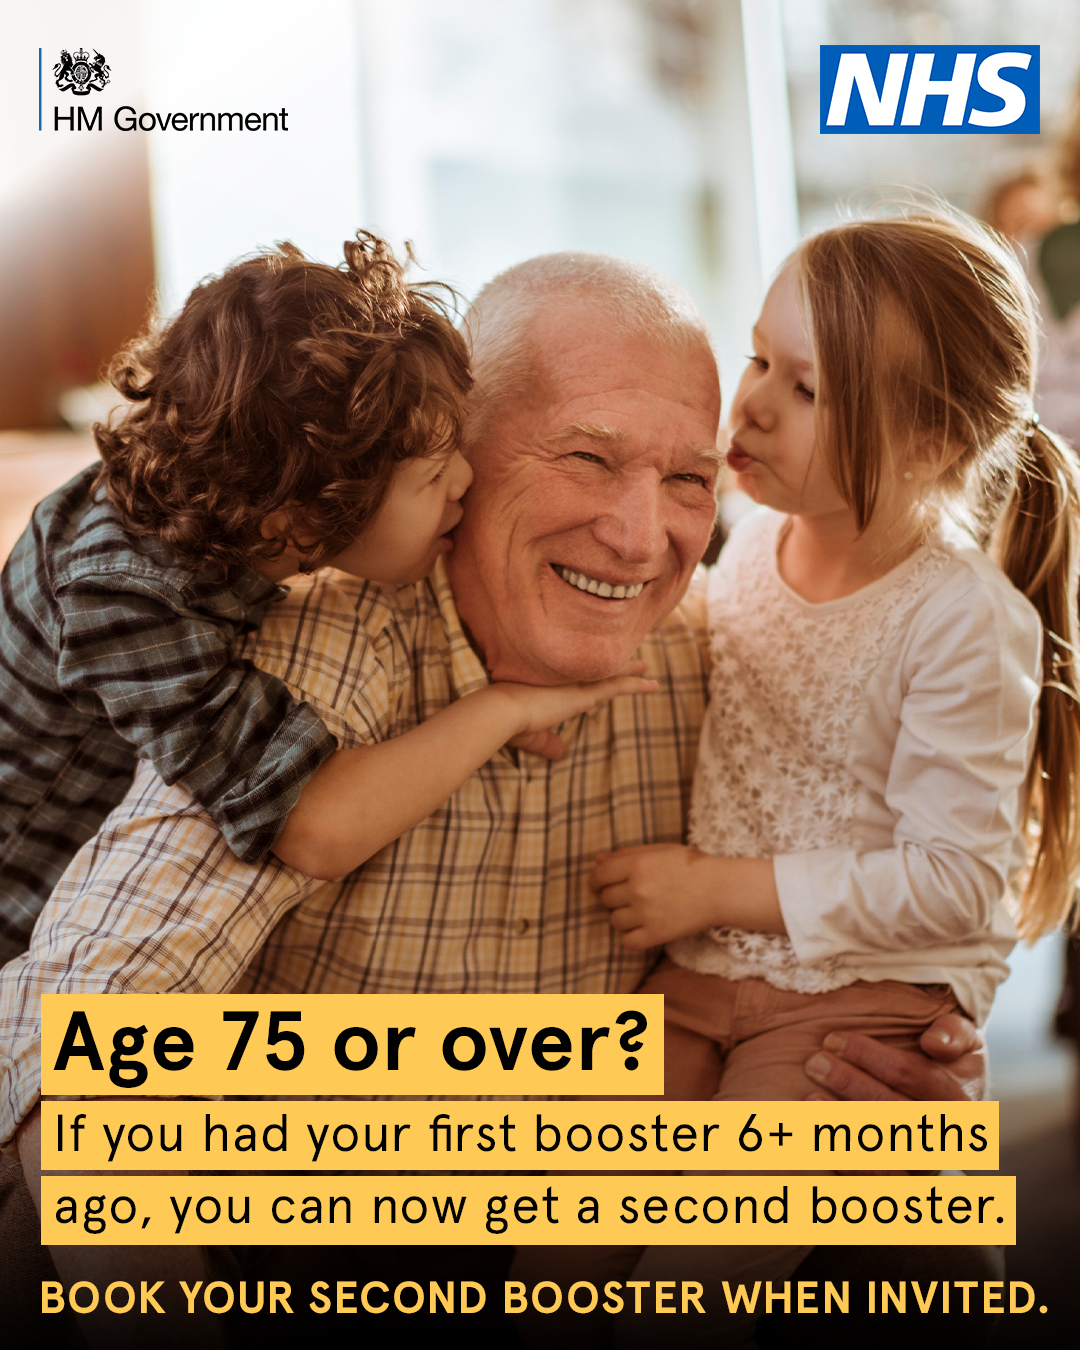 Over 75s Spring Booster